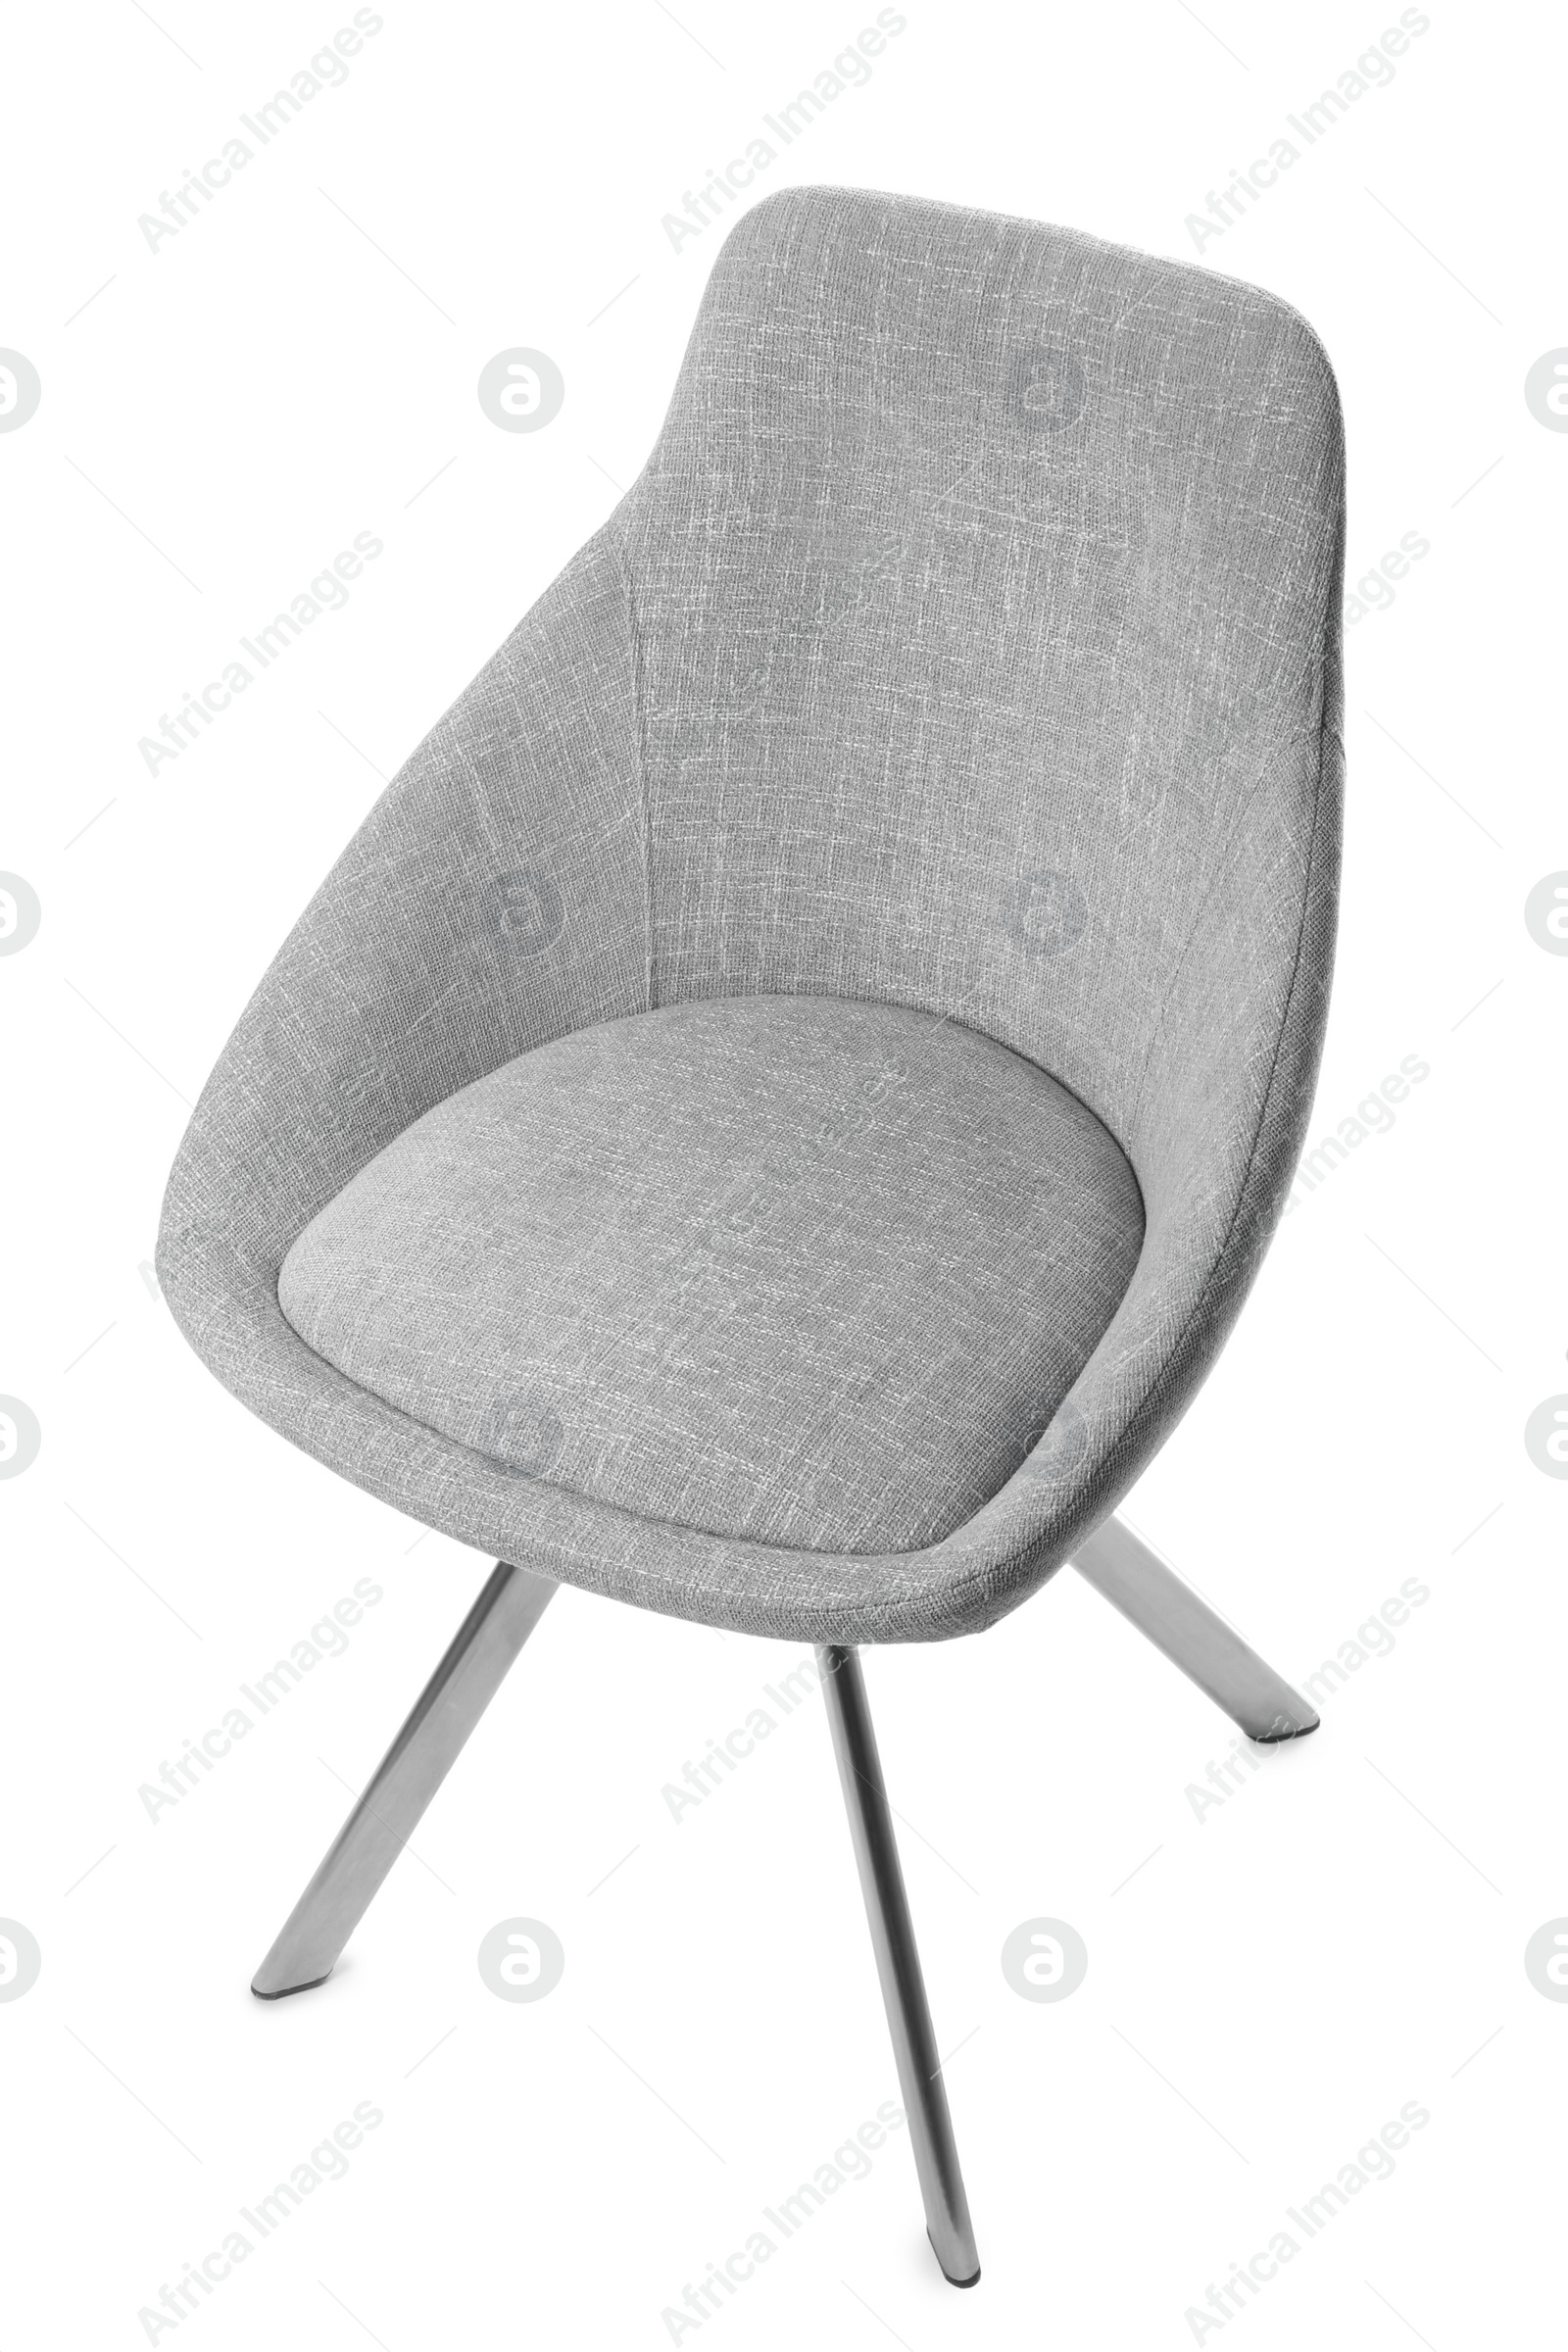 Photo of Stylish comfortable light grey chair isolated on white